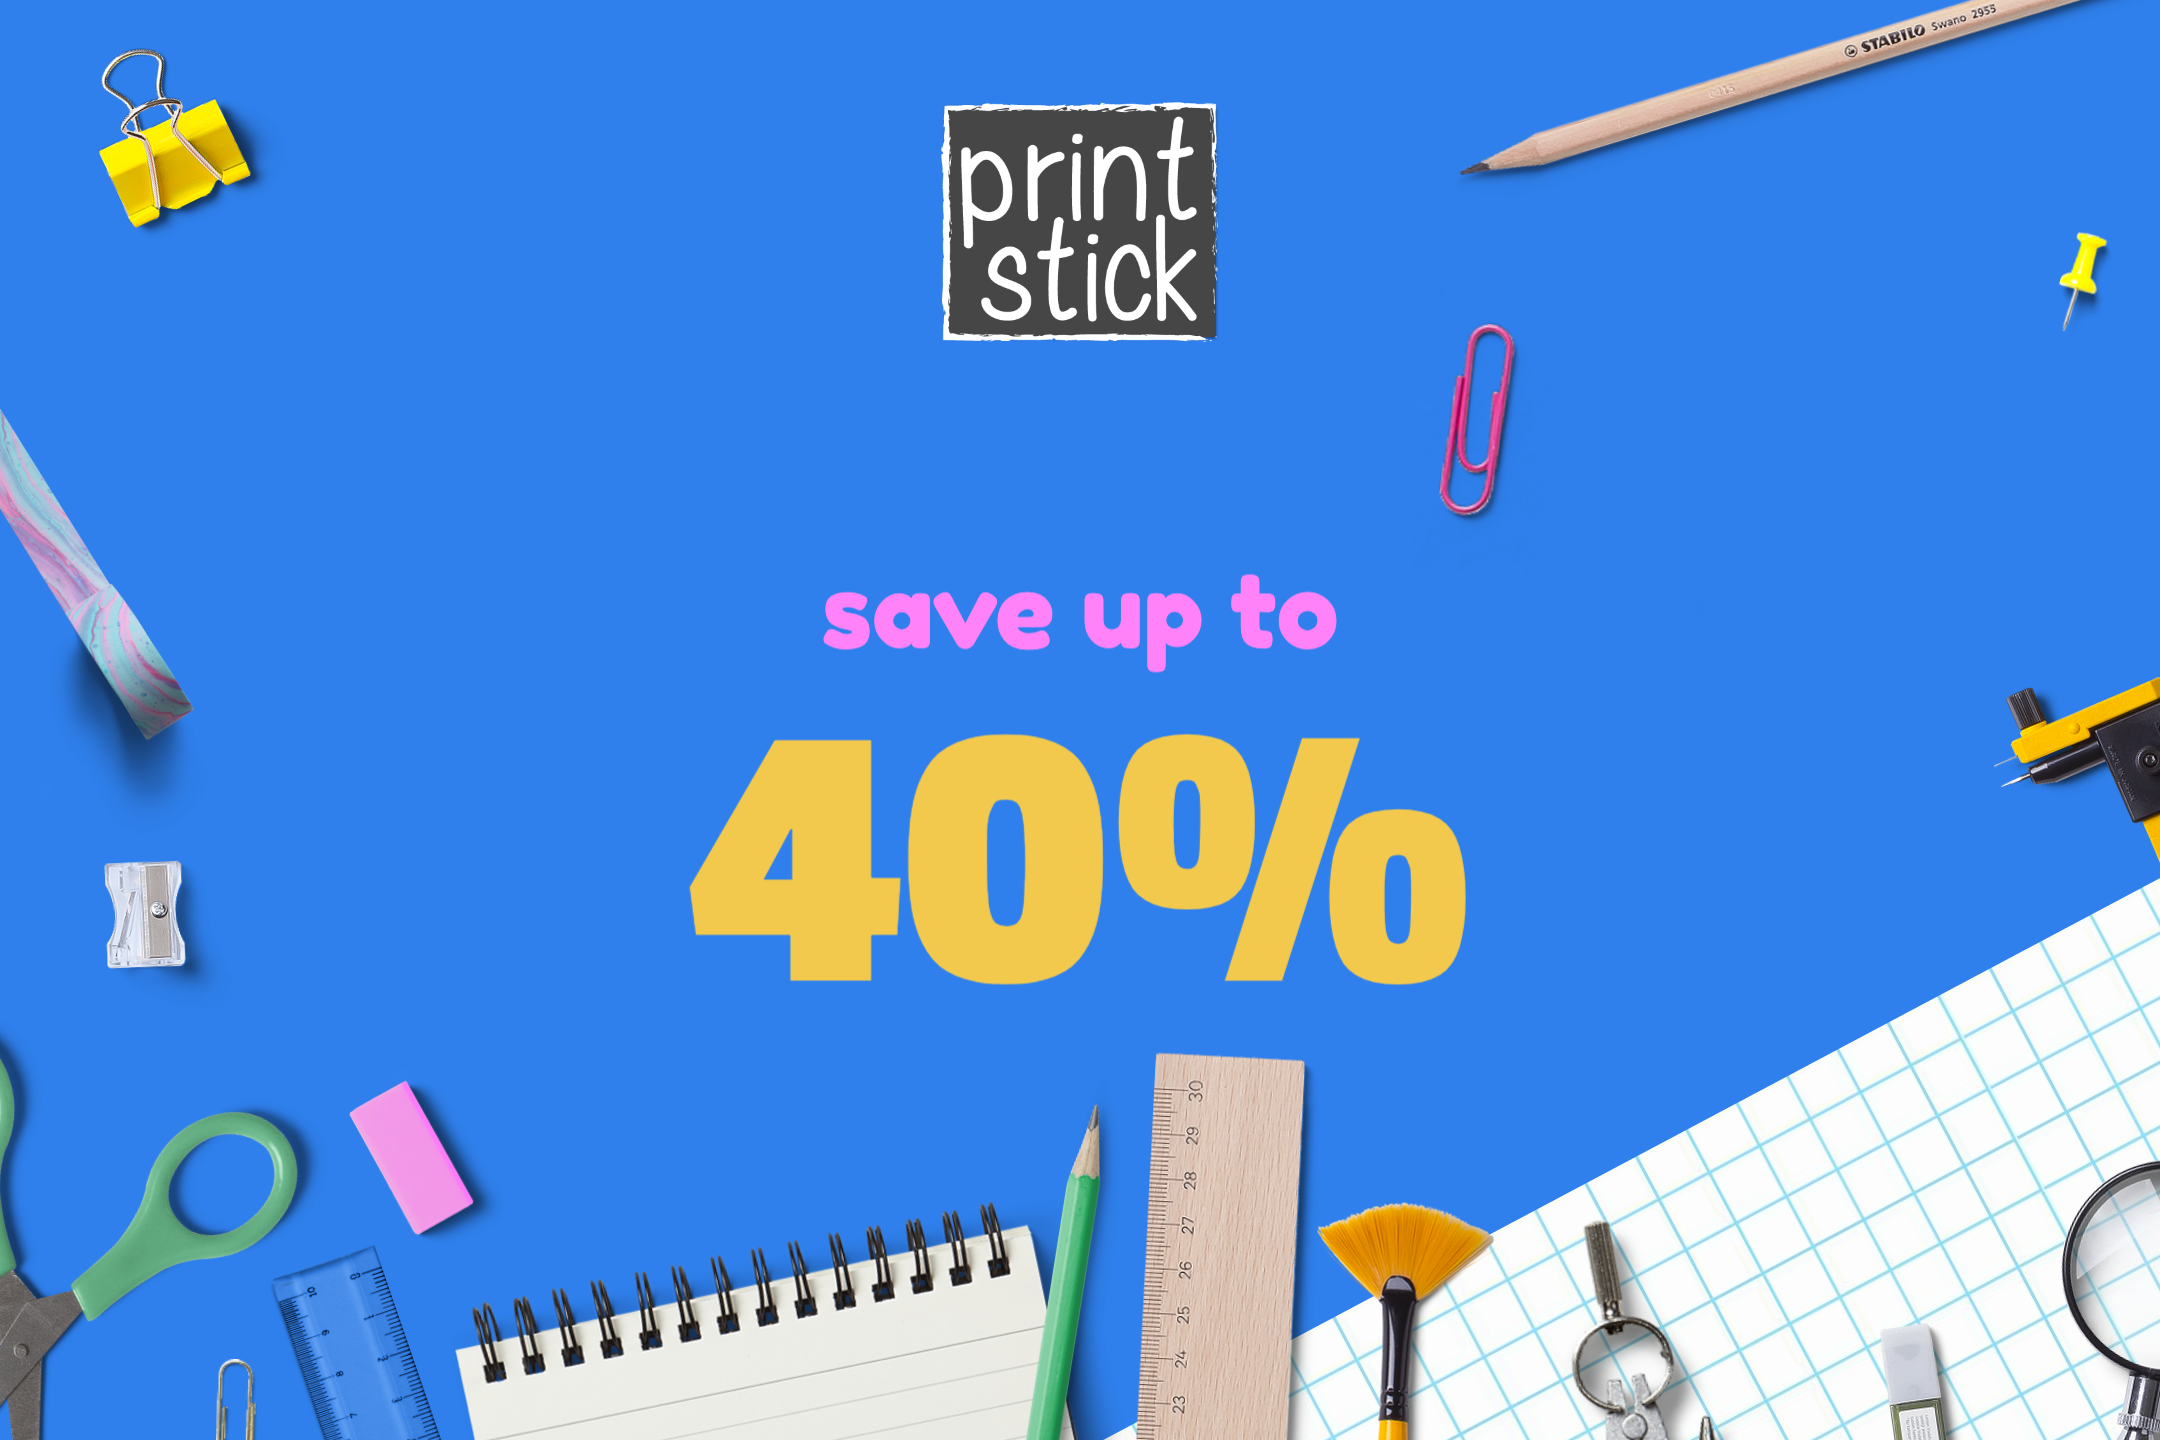 Get up to 40% off!